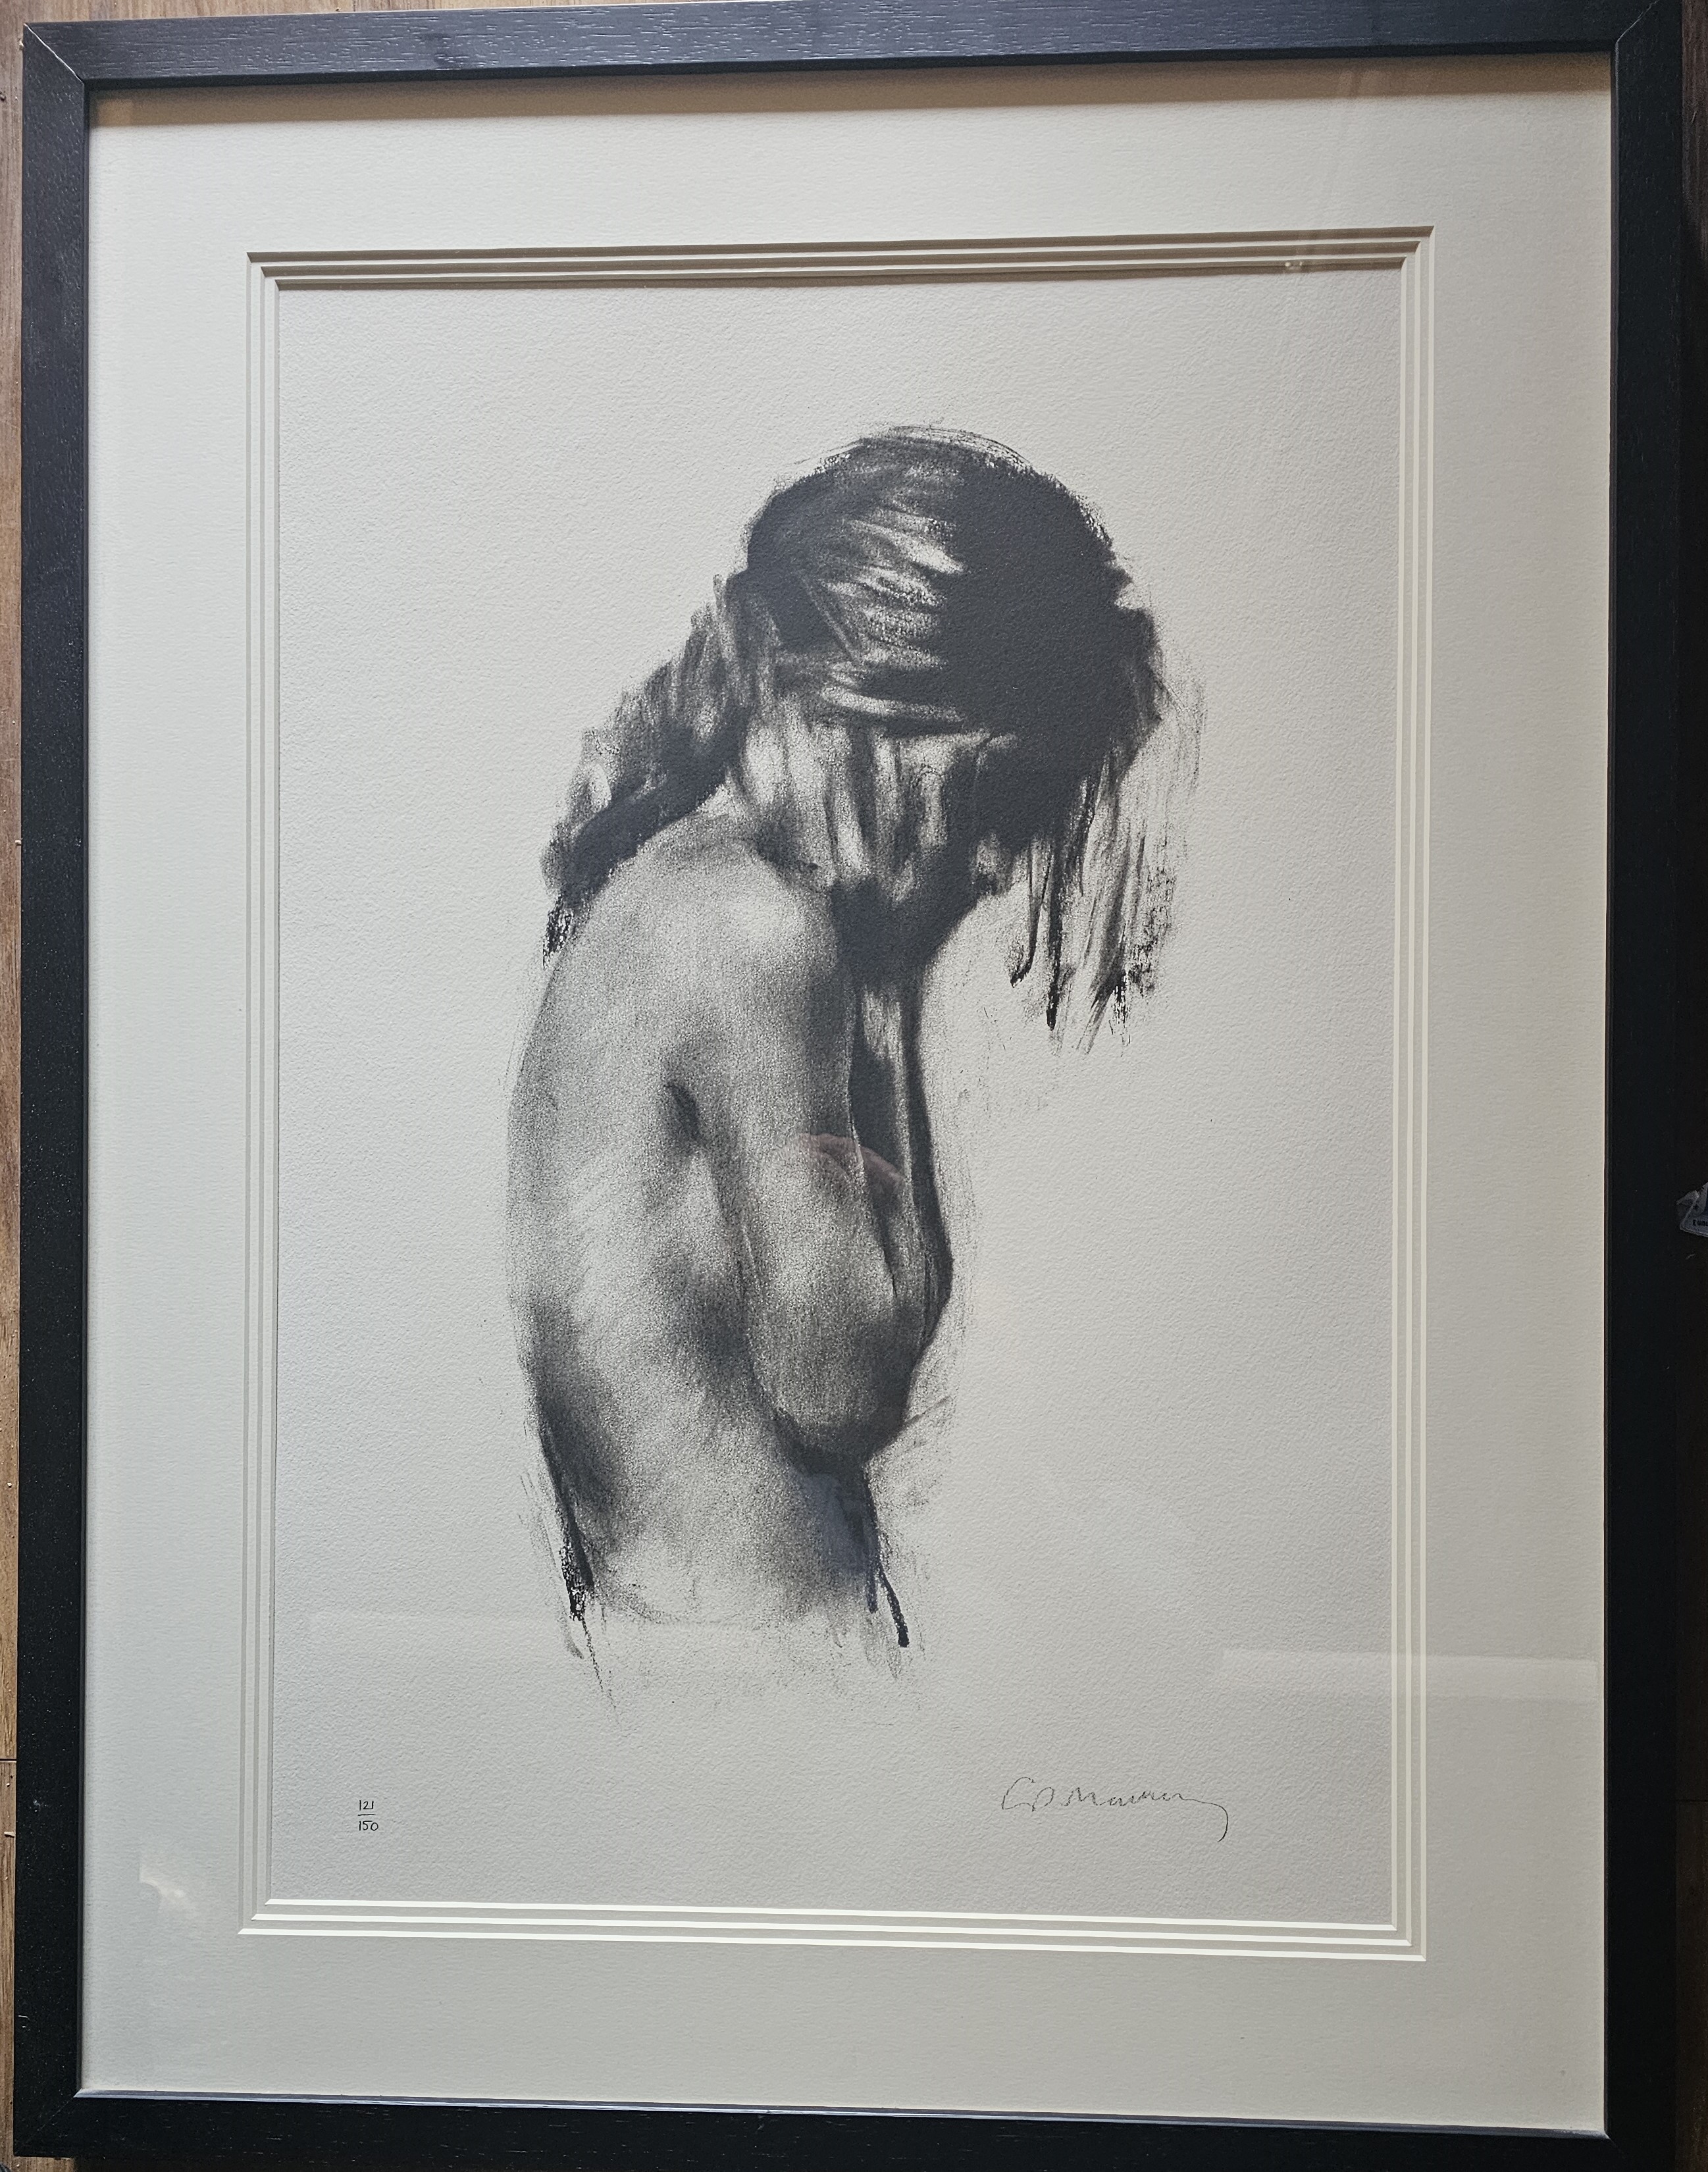 Charlie Mackesy, The Girl. Limited edition (no 121/150) signed lithograph. Framed and glazed, approx